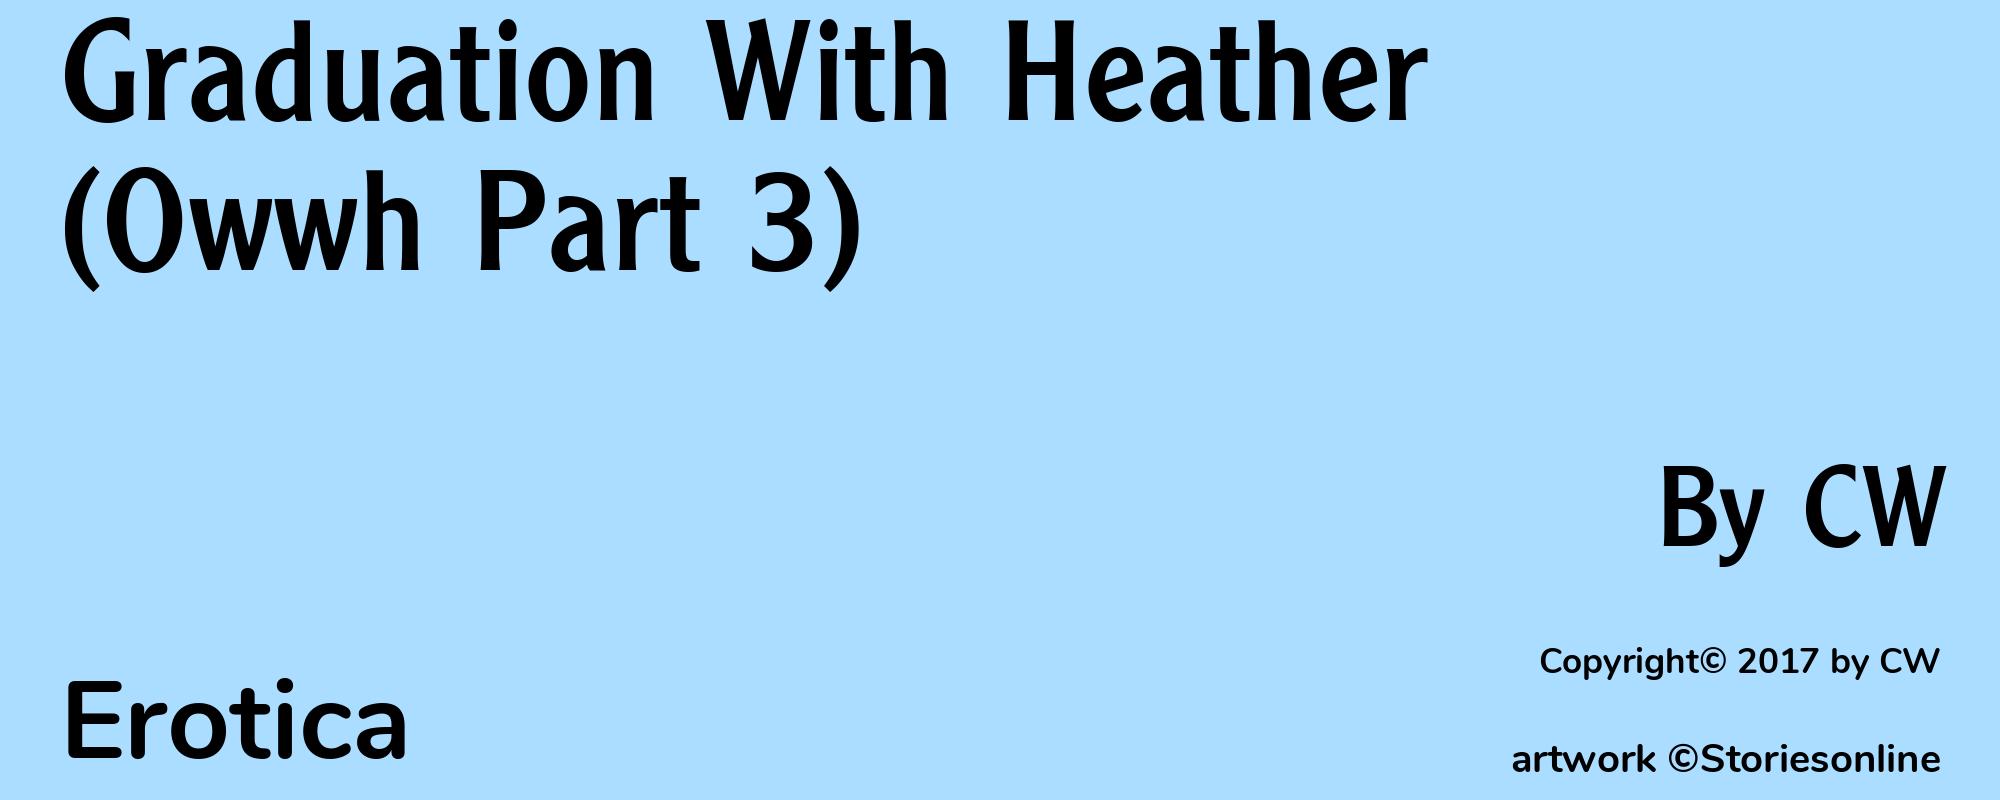 Graduation With Heather (Owwh Part 3) - Cover